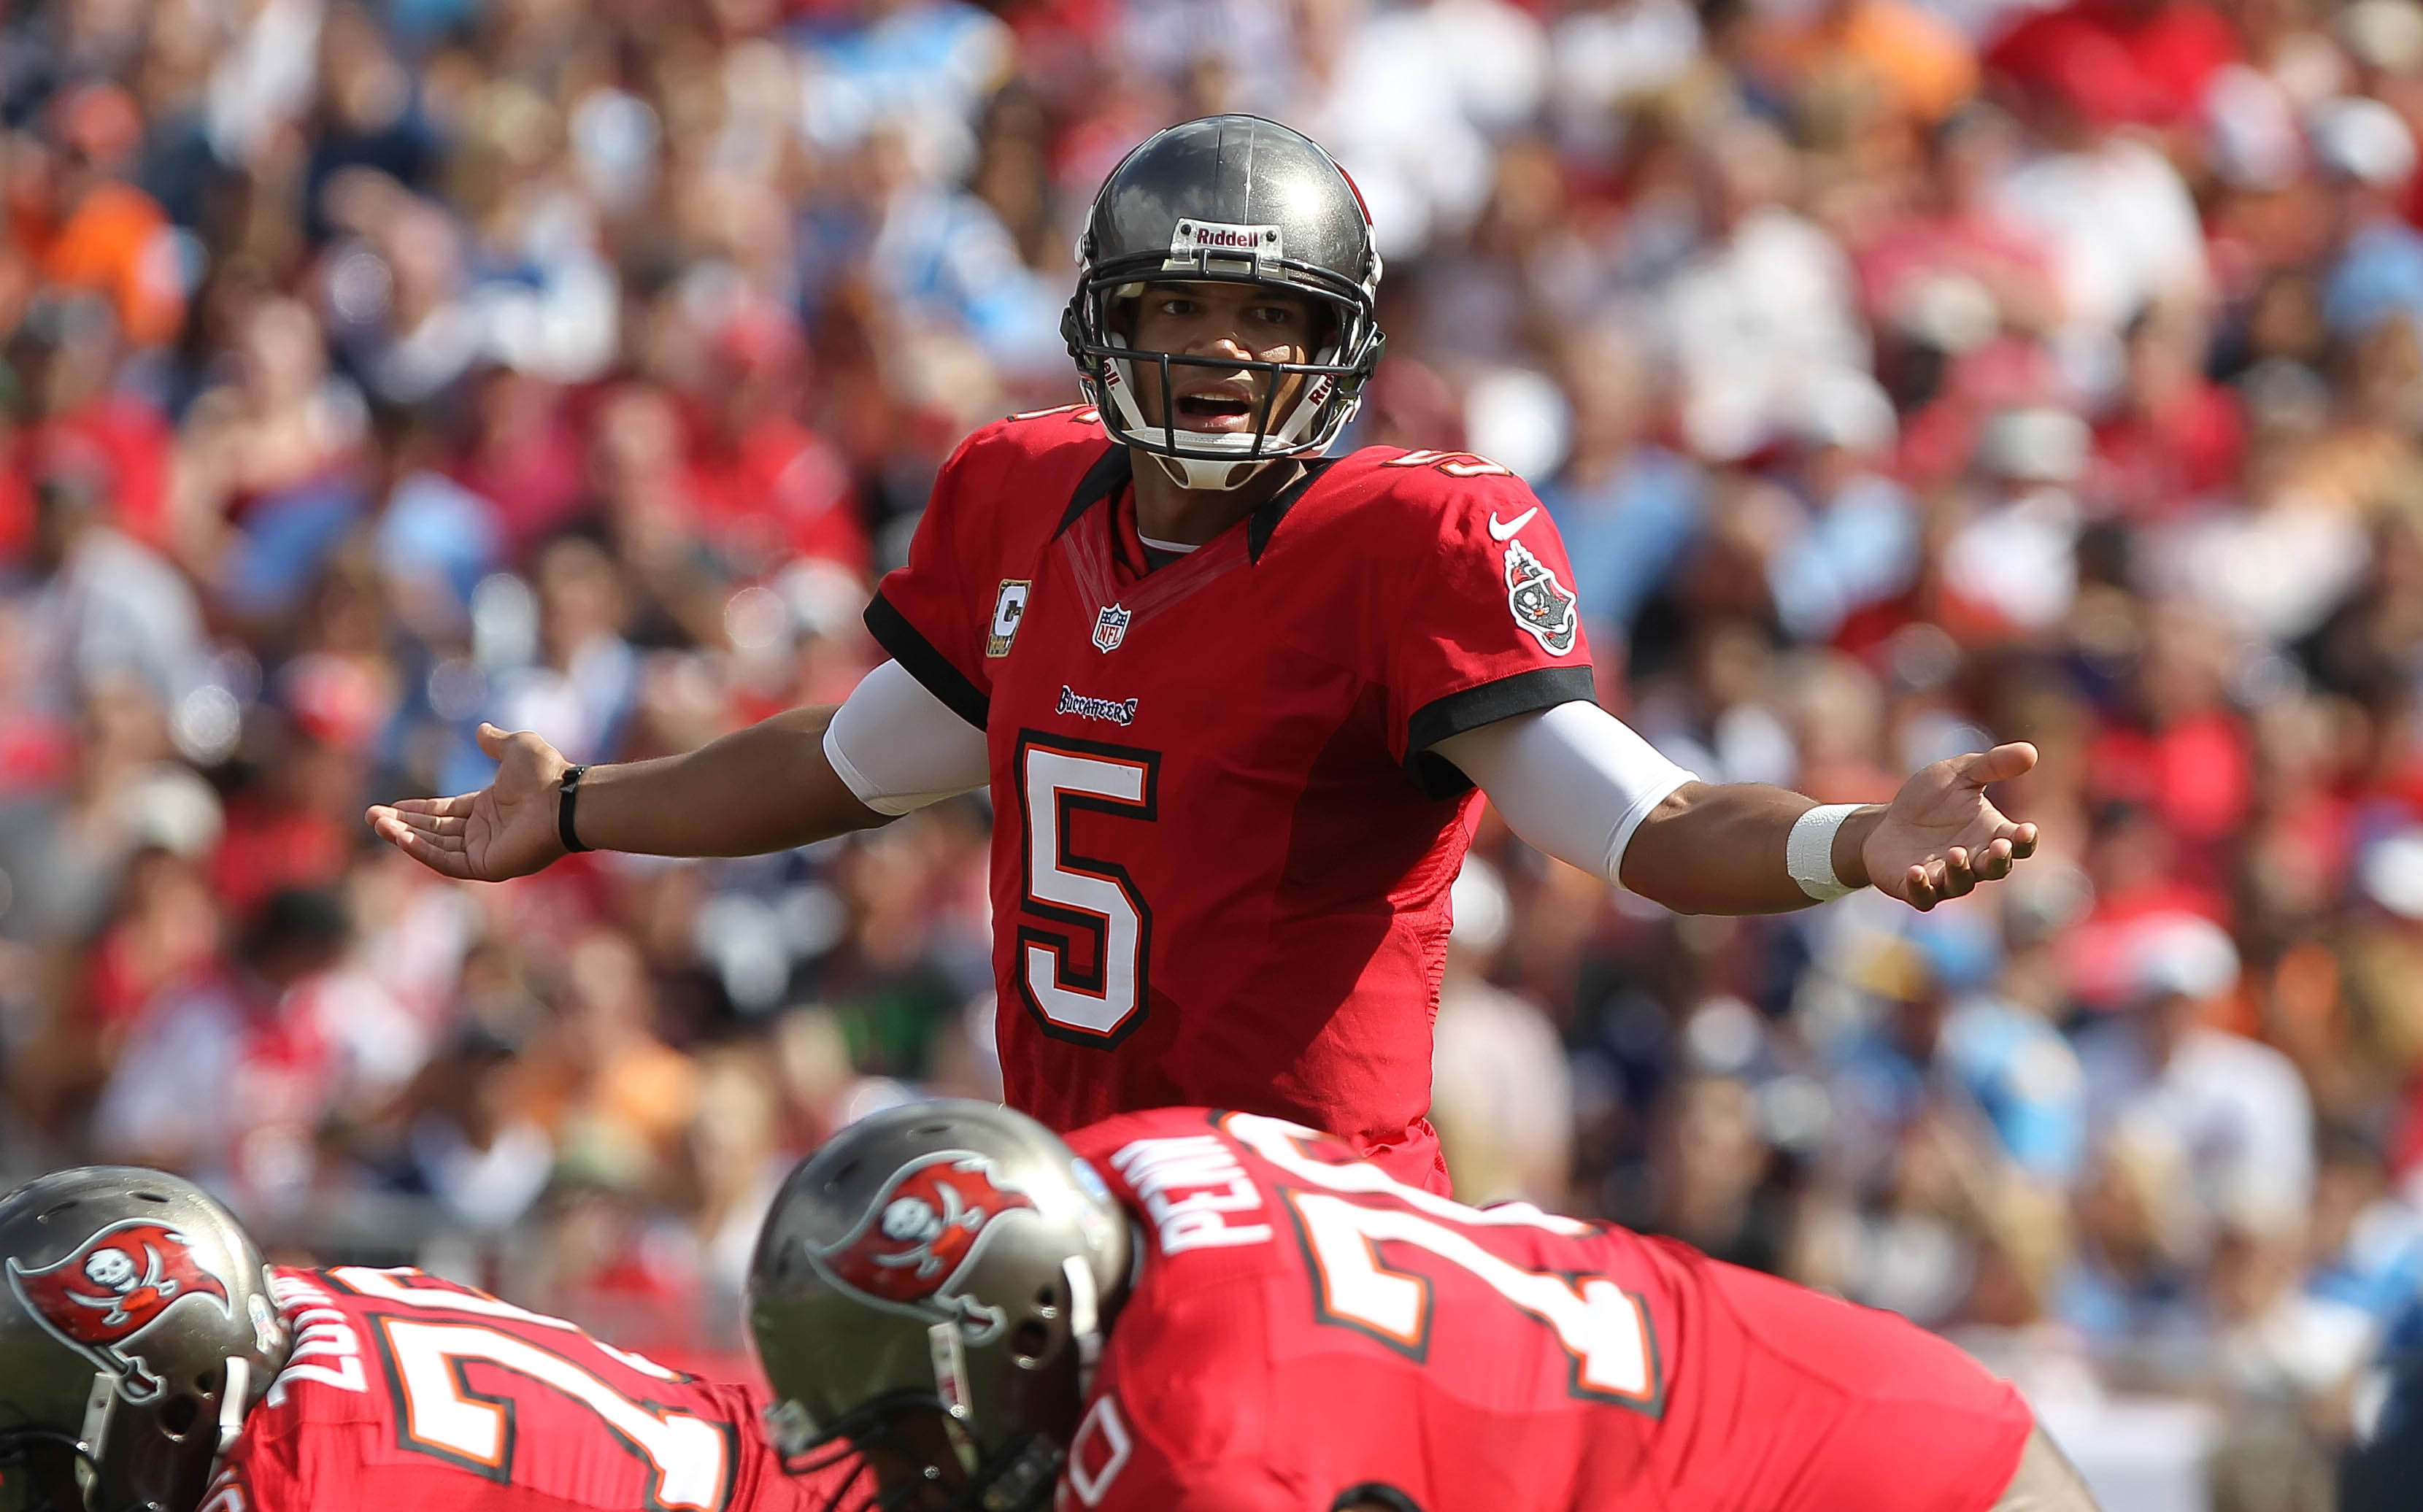 The Vikings will be better with Josh Freeman as their starting QB